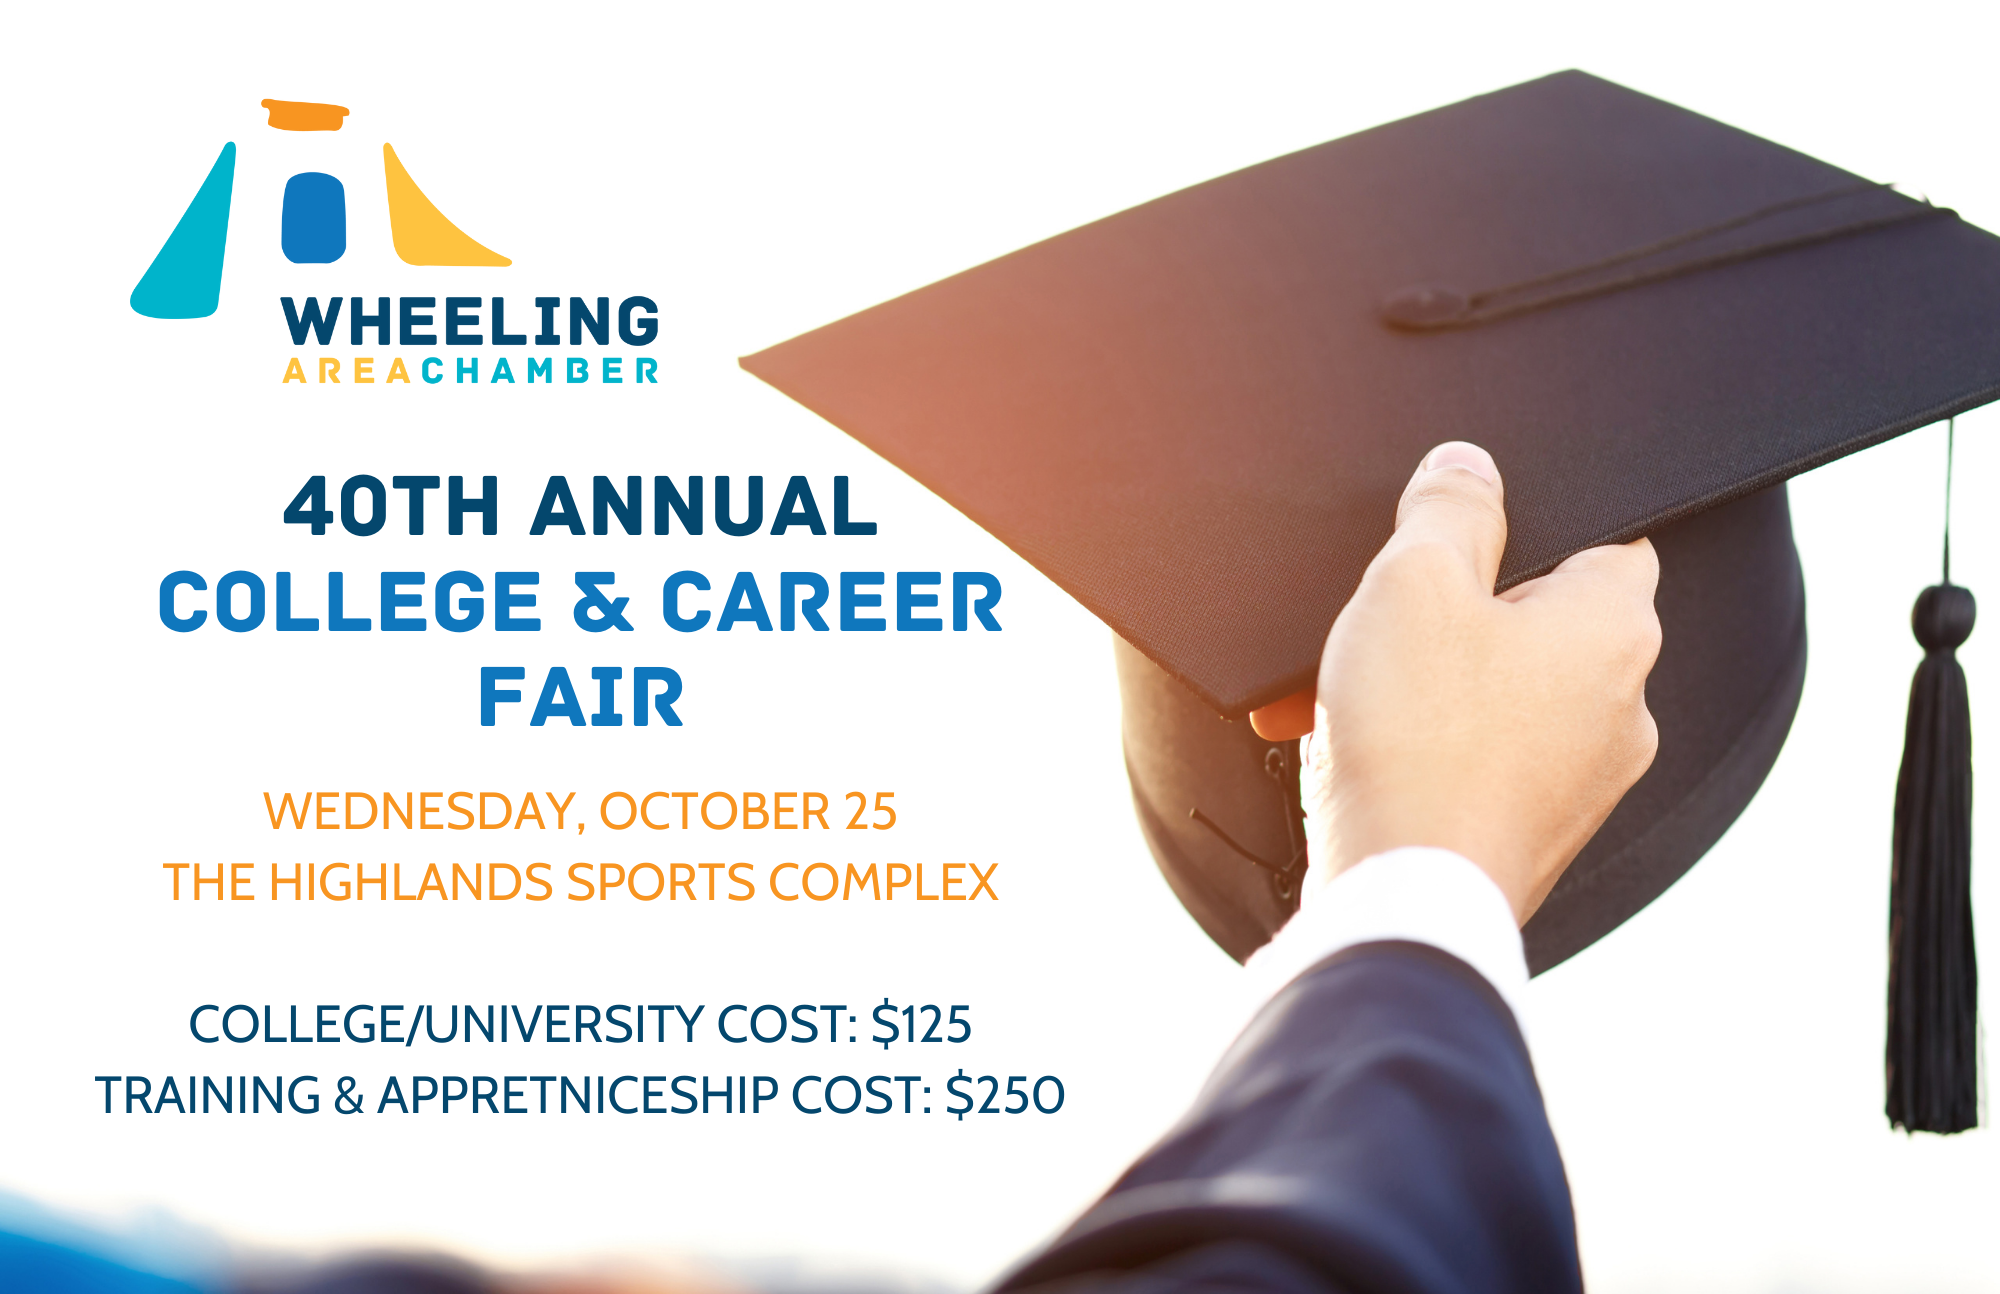 Wheeling Area Chamber 40th Annual College and Career Fair